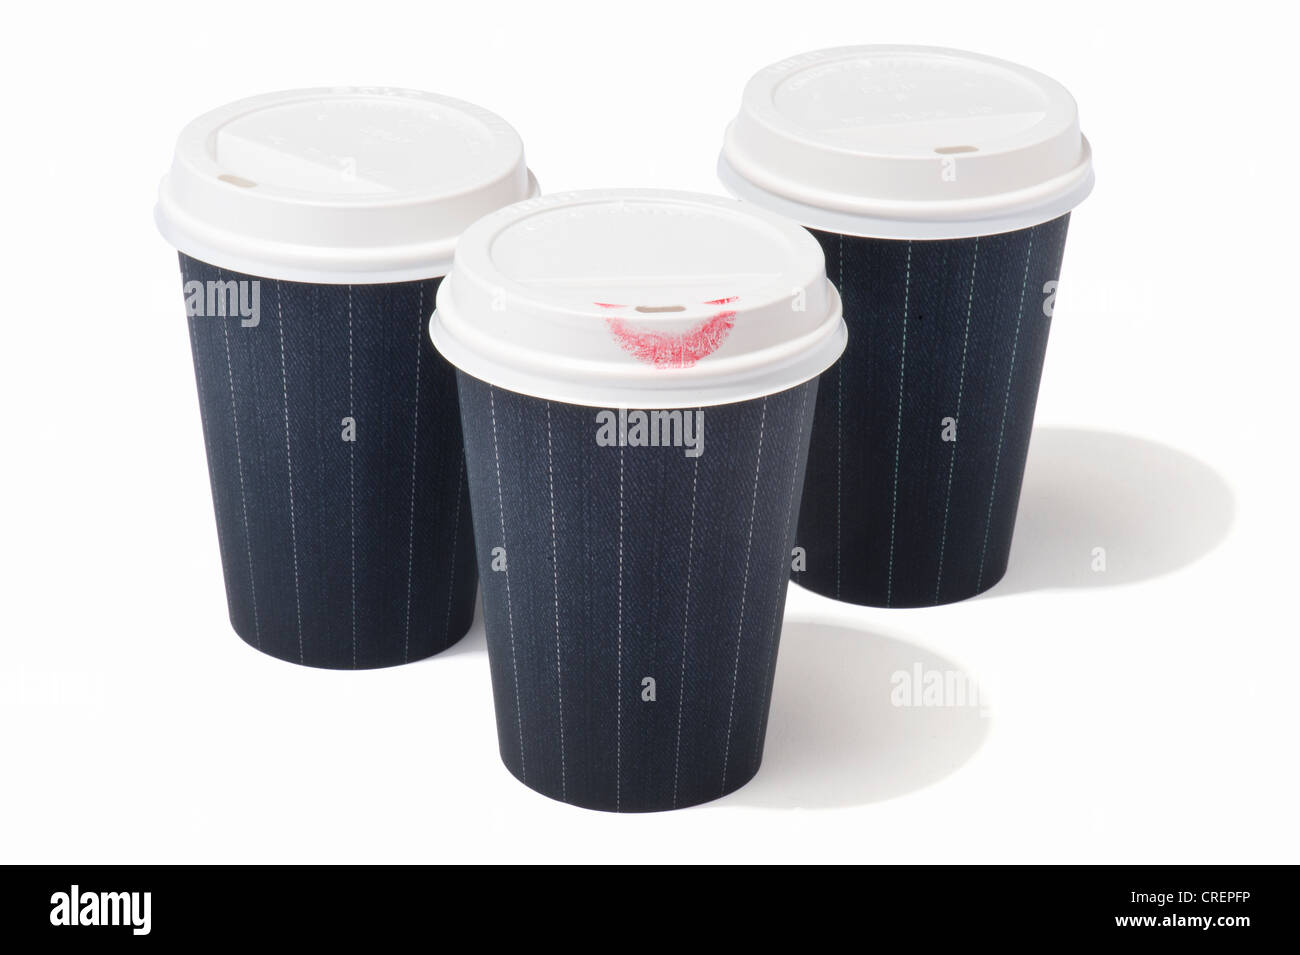 Three takeaway drink cups with pinstripe pattern, one with a lipstick mark Stock Photo